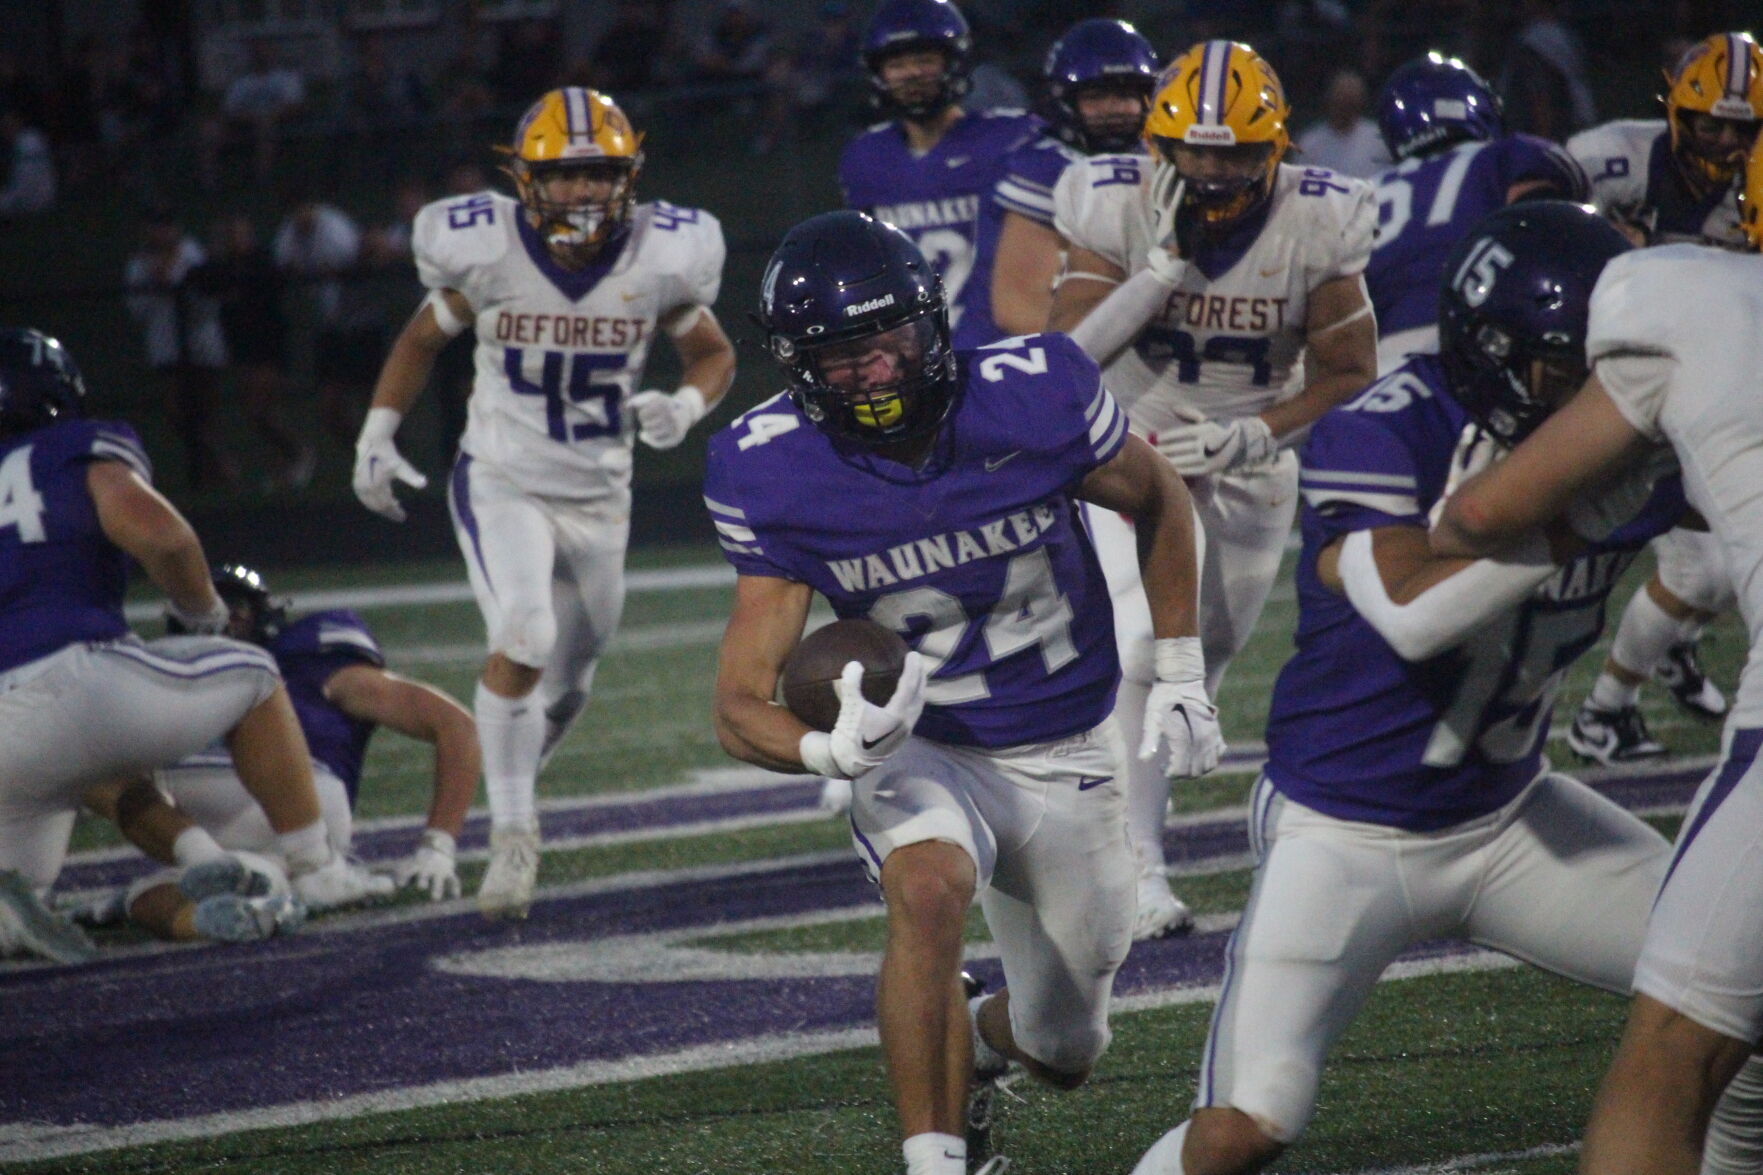 Games of the week: Waunakee moves on to Level 2